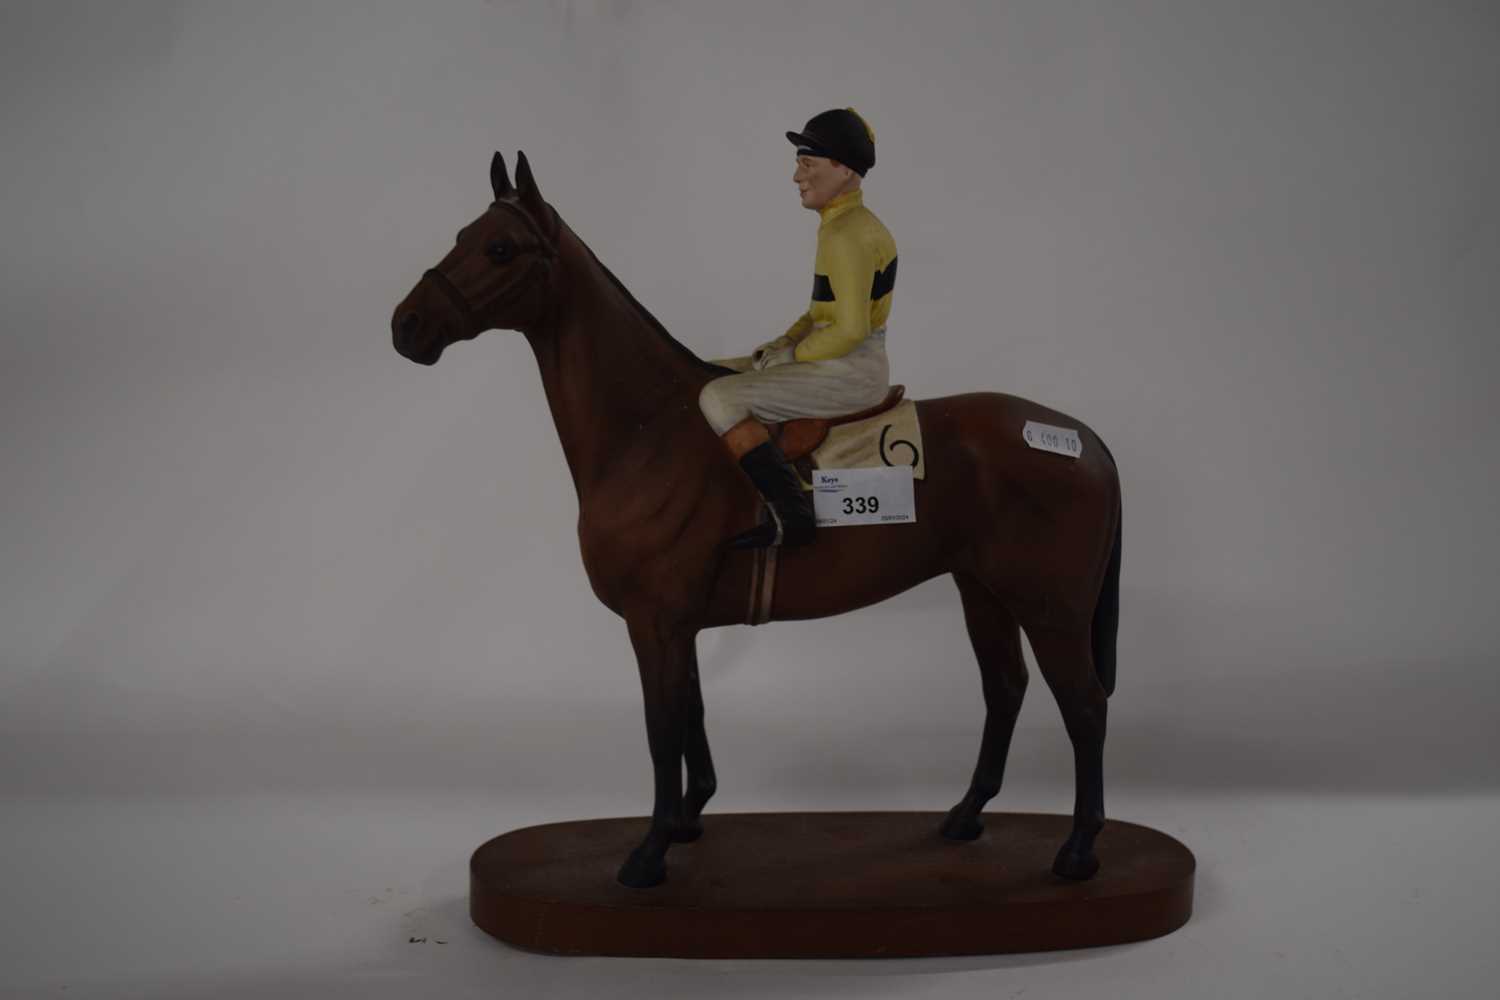 A Beswick horse model of Arkle with Pat Taaffe up, underside of horse with factory mark and title